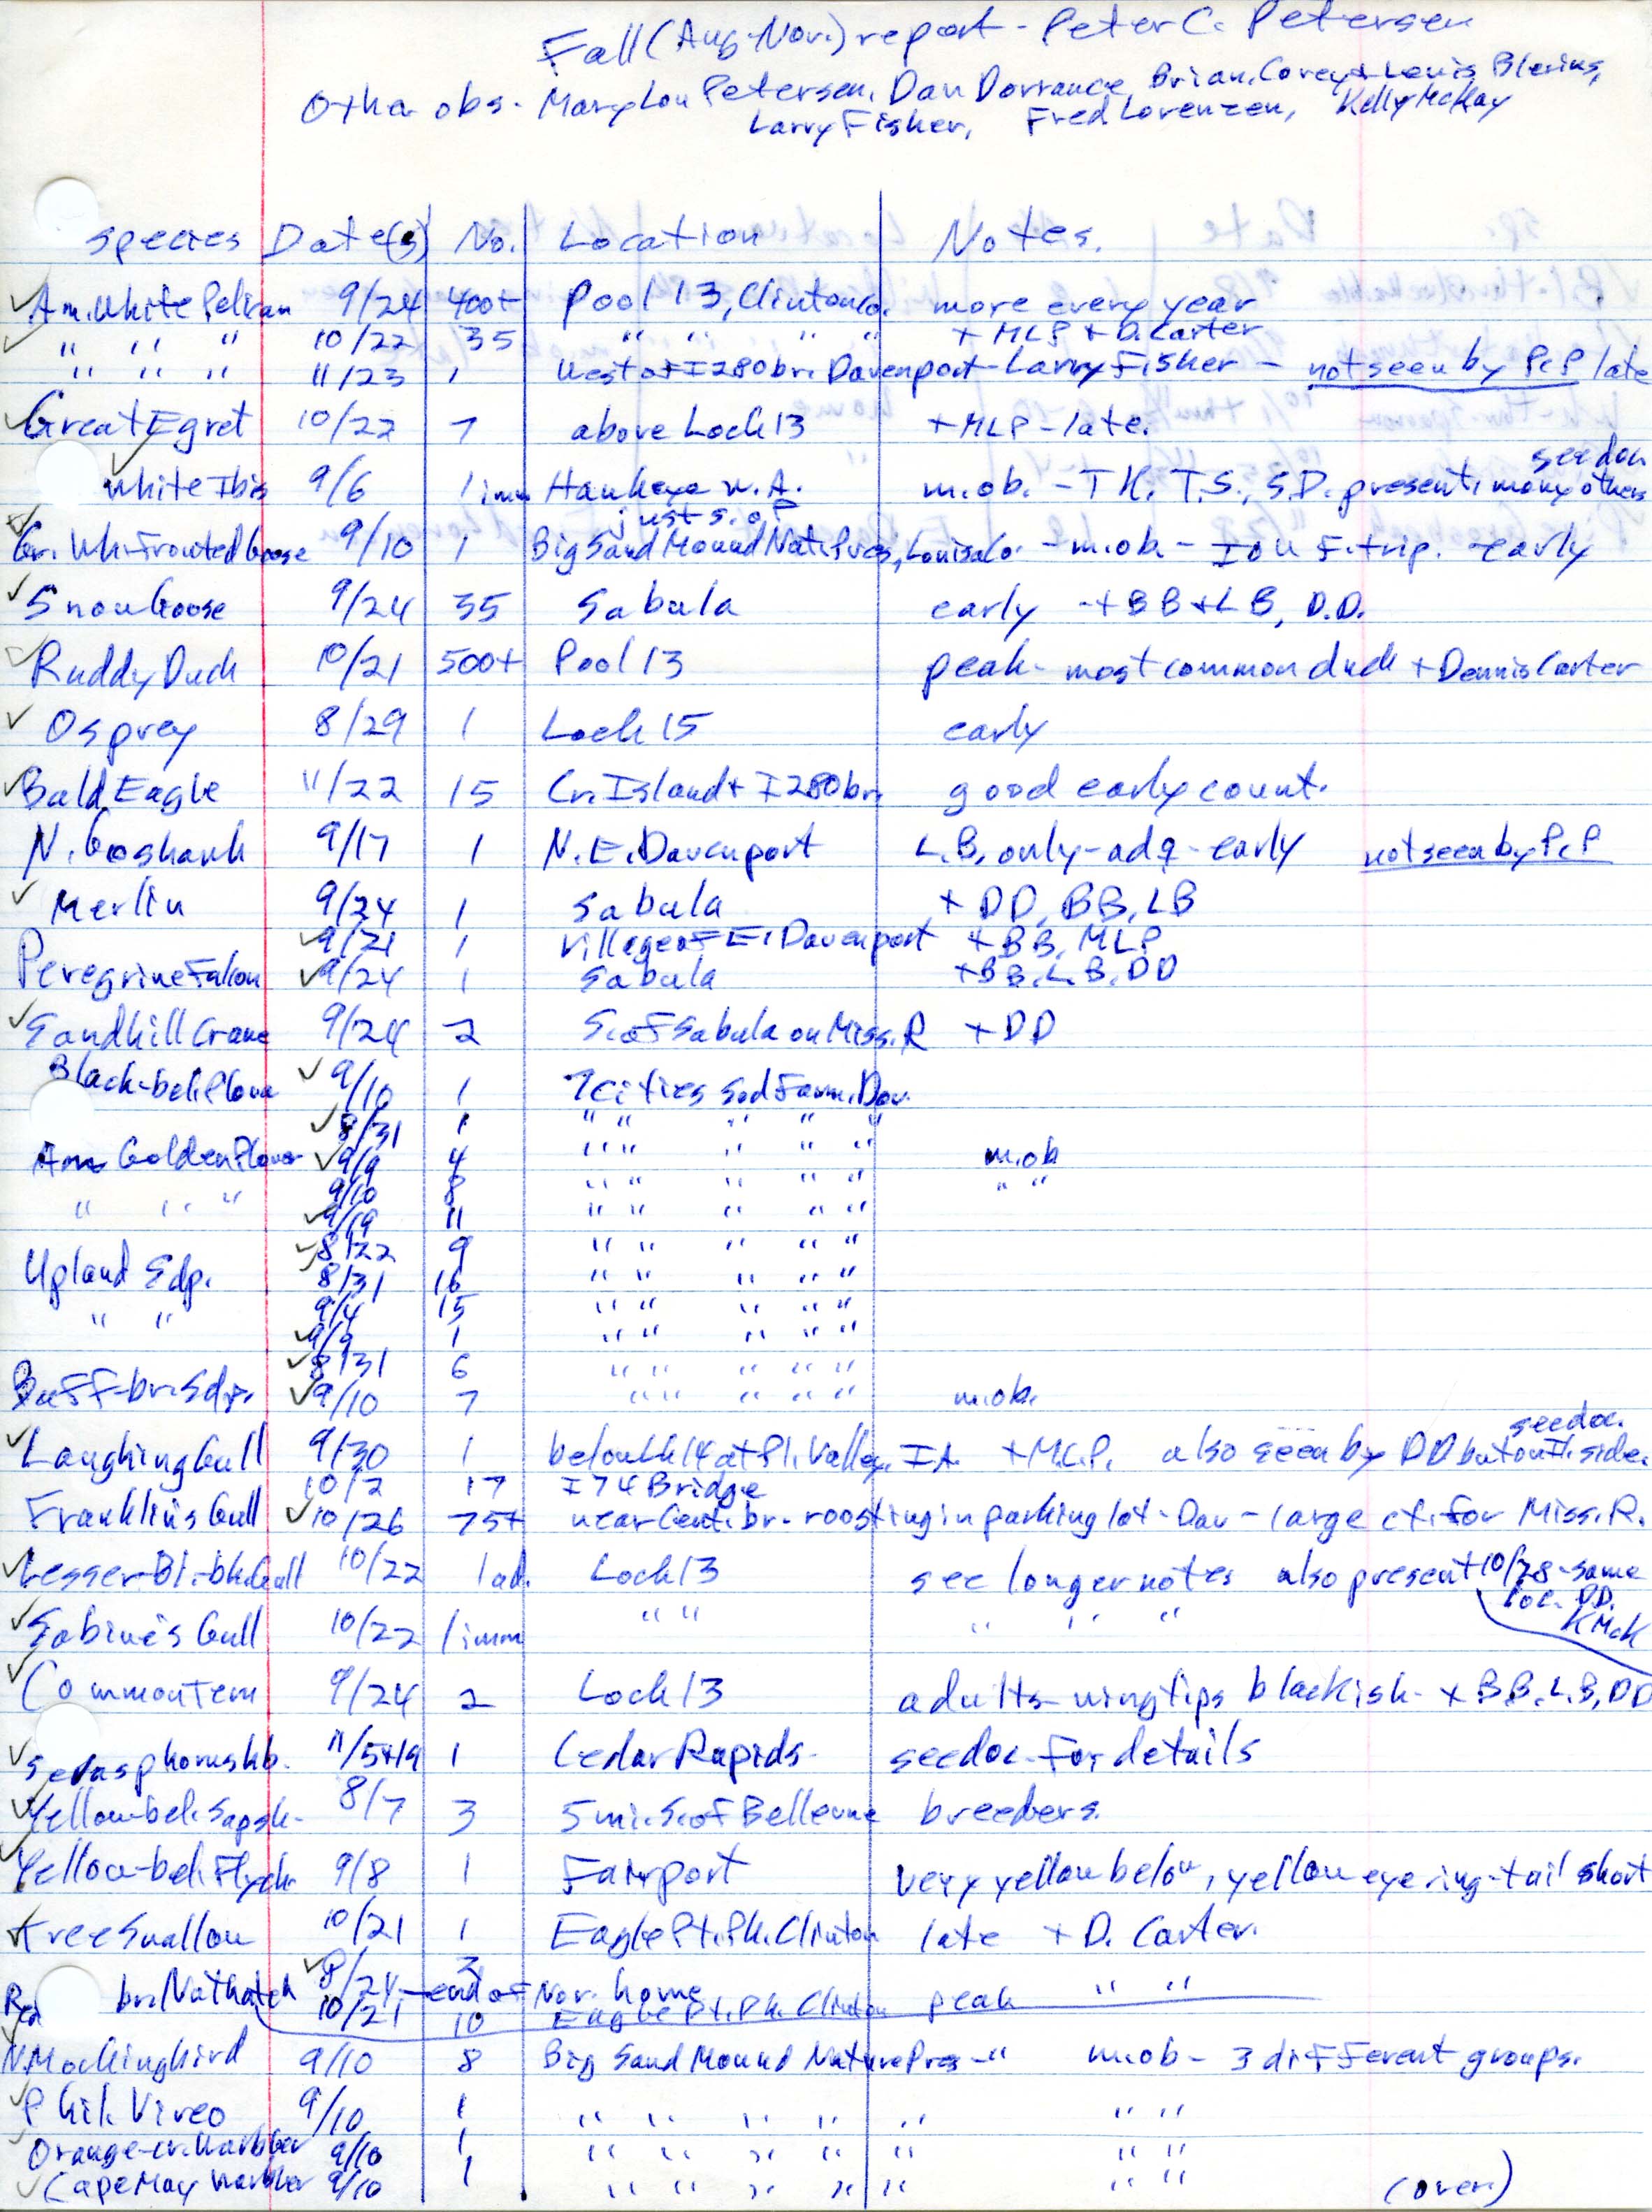 Field notes contributed by Peter C. Petersen, fall 1995